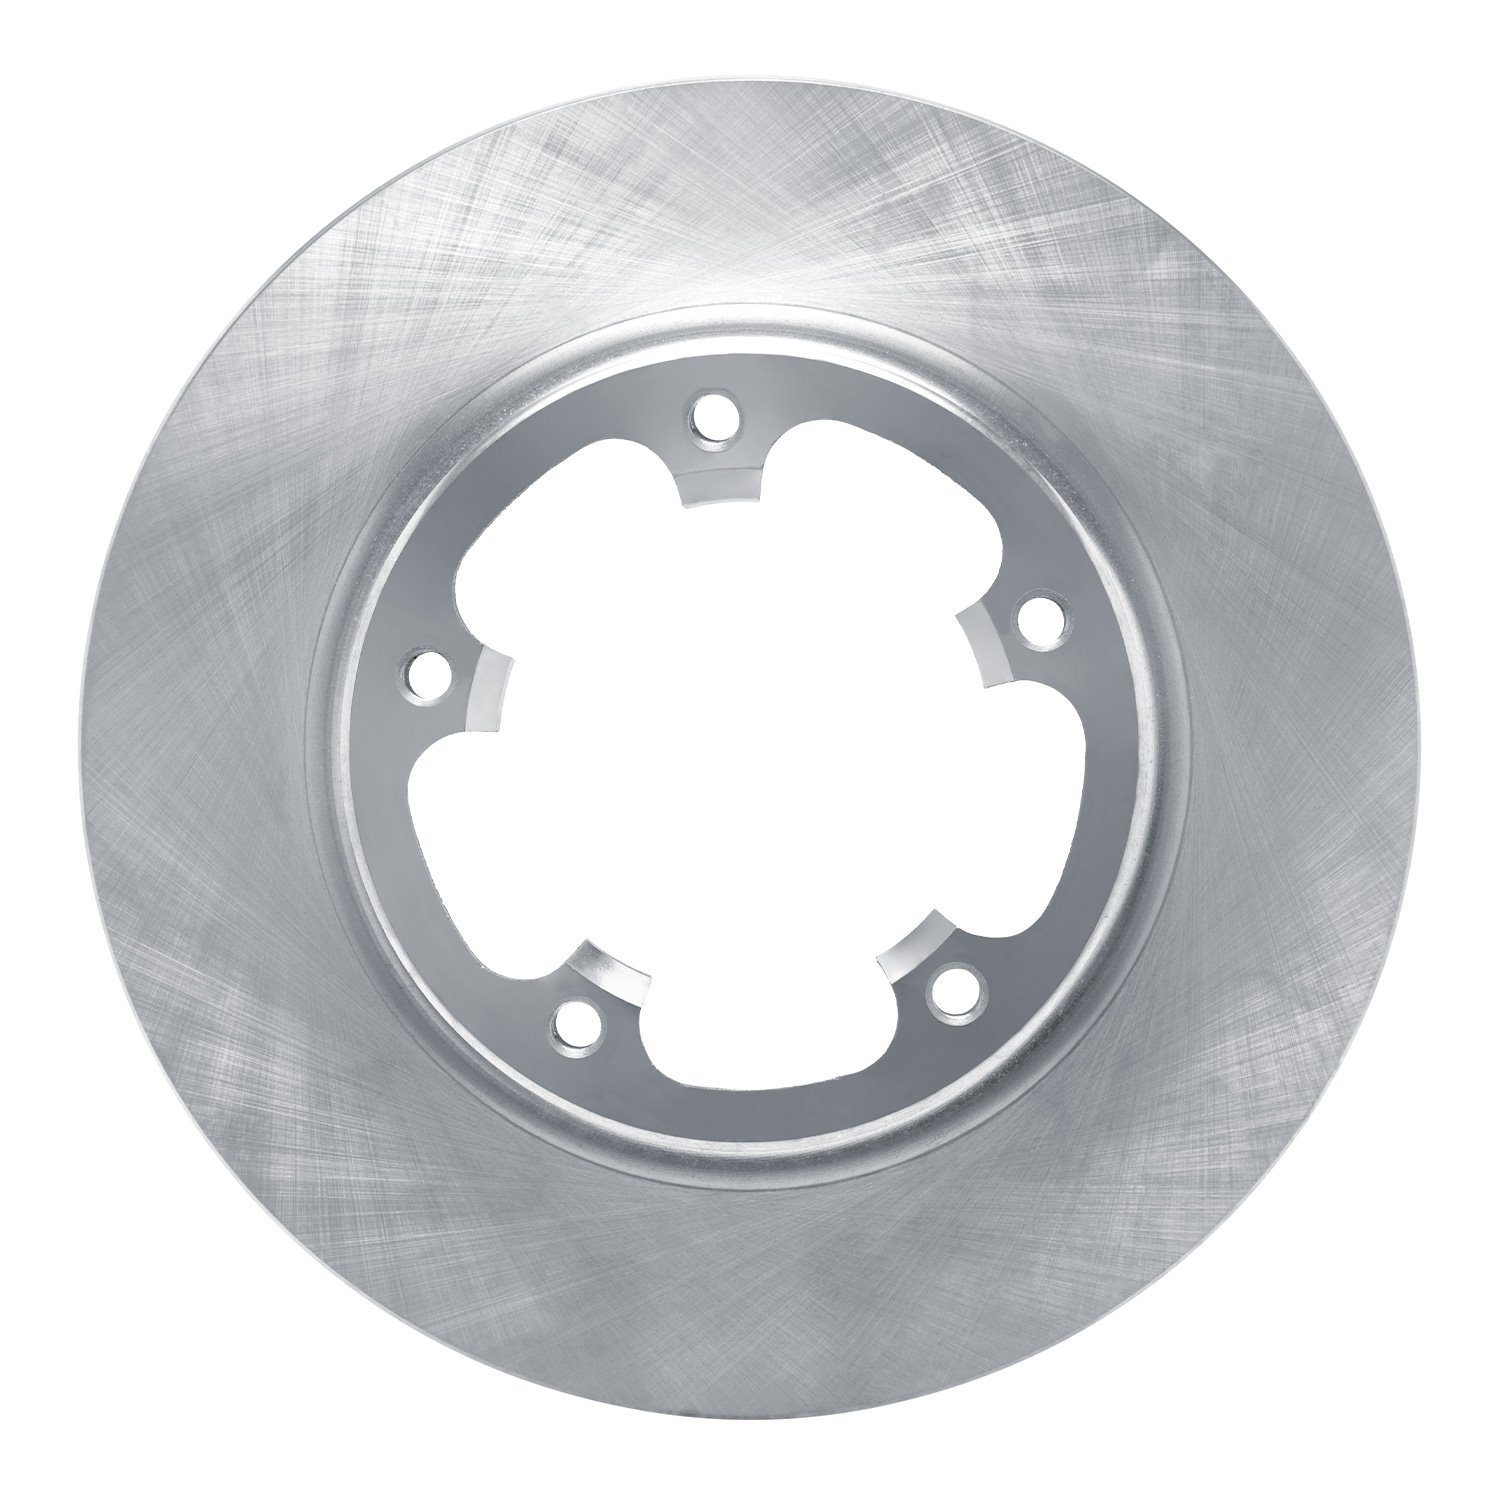 600-54301 Brake Rotor, Fits Select Ford/Lincoln/Mercury/Mazda, Position: Rear